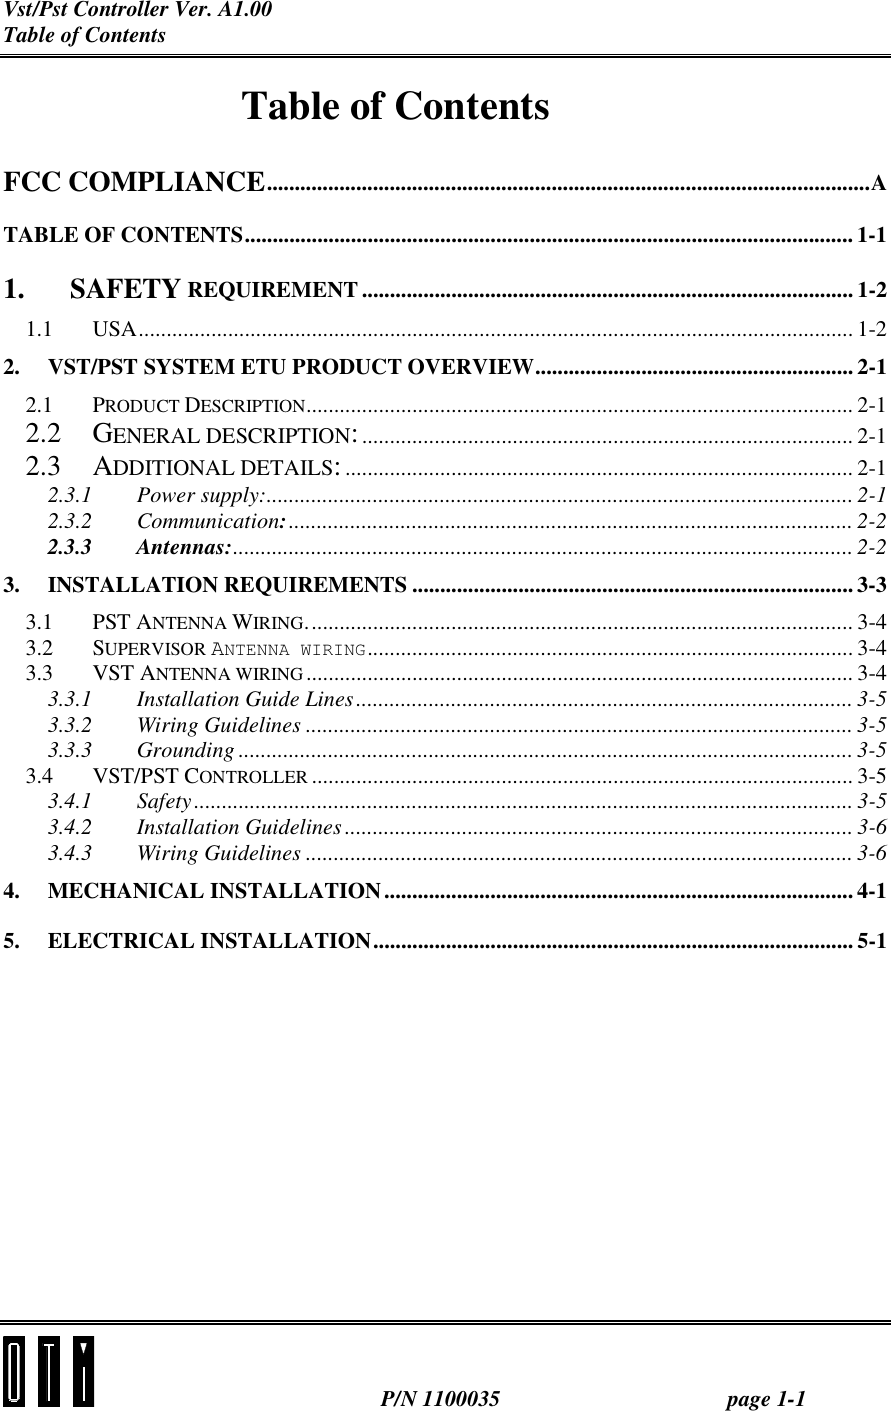 Vst/Pst Controller Ver. A1.00 Table of Contents  P/N 1100035 page 1-1 Table of Contents FCC COMPLIANCE............................................................................................................A TABLE OF CONTENTS............................................................................................................. 1-1 1. SAFETY REQUIREMENT ........................................................................................ 1-2 1.1 USA................................................................................................................................ 1-2 2. VST/PST SYSTEM ETU PRODUCT OVERVIEW......................................................... 2-1 2.1 PRODUCT DESCRIPTION.................................................................................................. 2-1 2.2 GENERAL DESCRIPTION:........................................................................................ 2-1 2.3 ADDITIONAL DETAILS:........................................................................................... 2-1 2.3.1 Power supply:......................................................................................................... 2-1 2.3.2 Communication:..................................................................................................... 2-2 2.3.3 Antennas:............................................................................................................... 2-2 3. INSTALLATION REQUIREMENTS ............................................................................... 3-3 3.1 PST ANTENNA WIRING.................................................................................................. 3-4 3.2 SUPERVISOR ANTENNA WIRING....................................................................................... 3-4 3.3 VST ANTENNA WIRING.................................................................................................. 3-4 3.3.1 Installation Guide Lines......................................................................................... 3-5 3.3.2 Wiring Guidelines .................................................................................................. 3-5 3.3.3 Grounding .............................................................................................................. 3-5 3.4 VST/PST CONTROLLER ................................................................................................. 3-5 3.4.1 Safety ...................................................................................................................... 3-5 3.4.2 Installation Guidelines ........................................................................................... 3-6 3.4.3 Wiring Guidelines .................................................................................................. 3-6 4. MECHANICAL INSTALLATION.................................................................................... 4-1 5. ELECTRICAL INSTALLATION...................................................................................... 5-1   